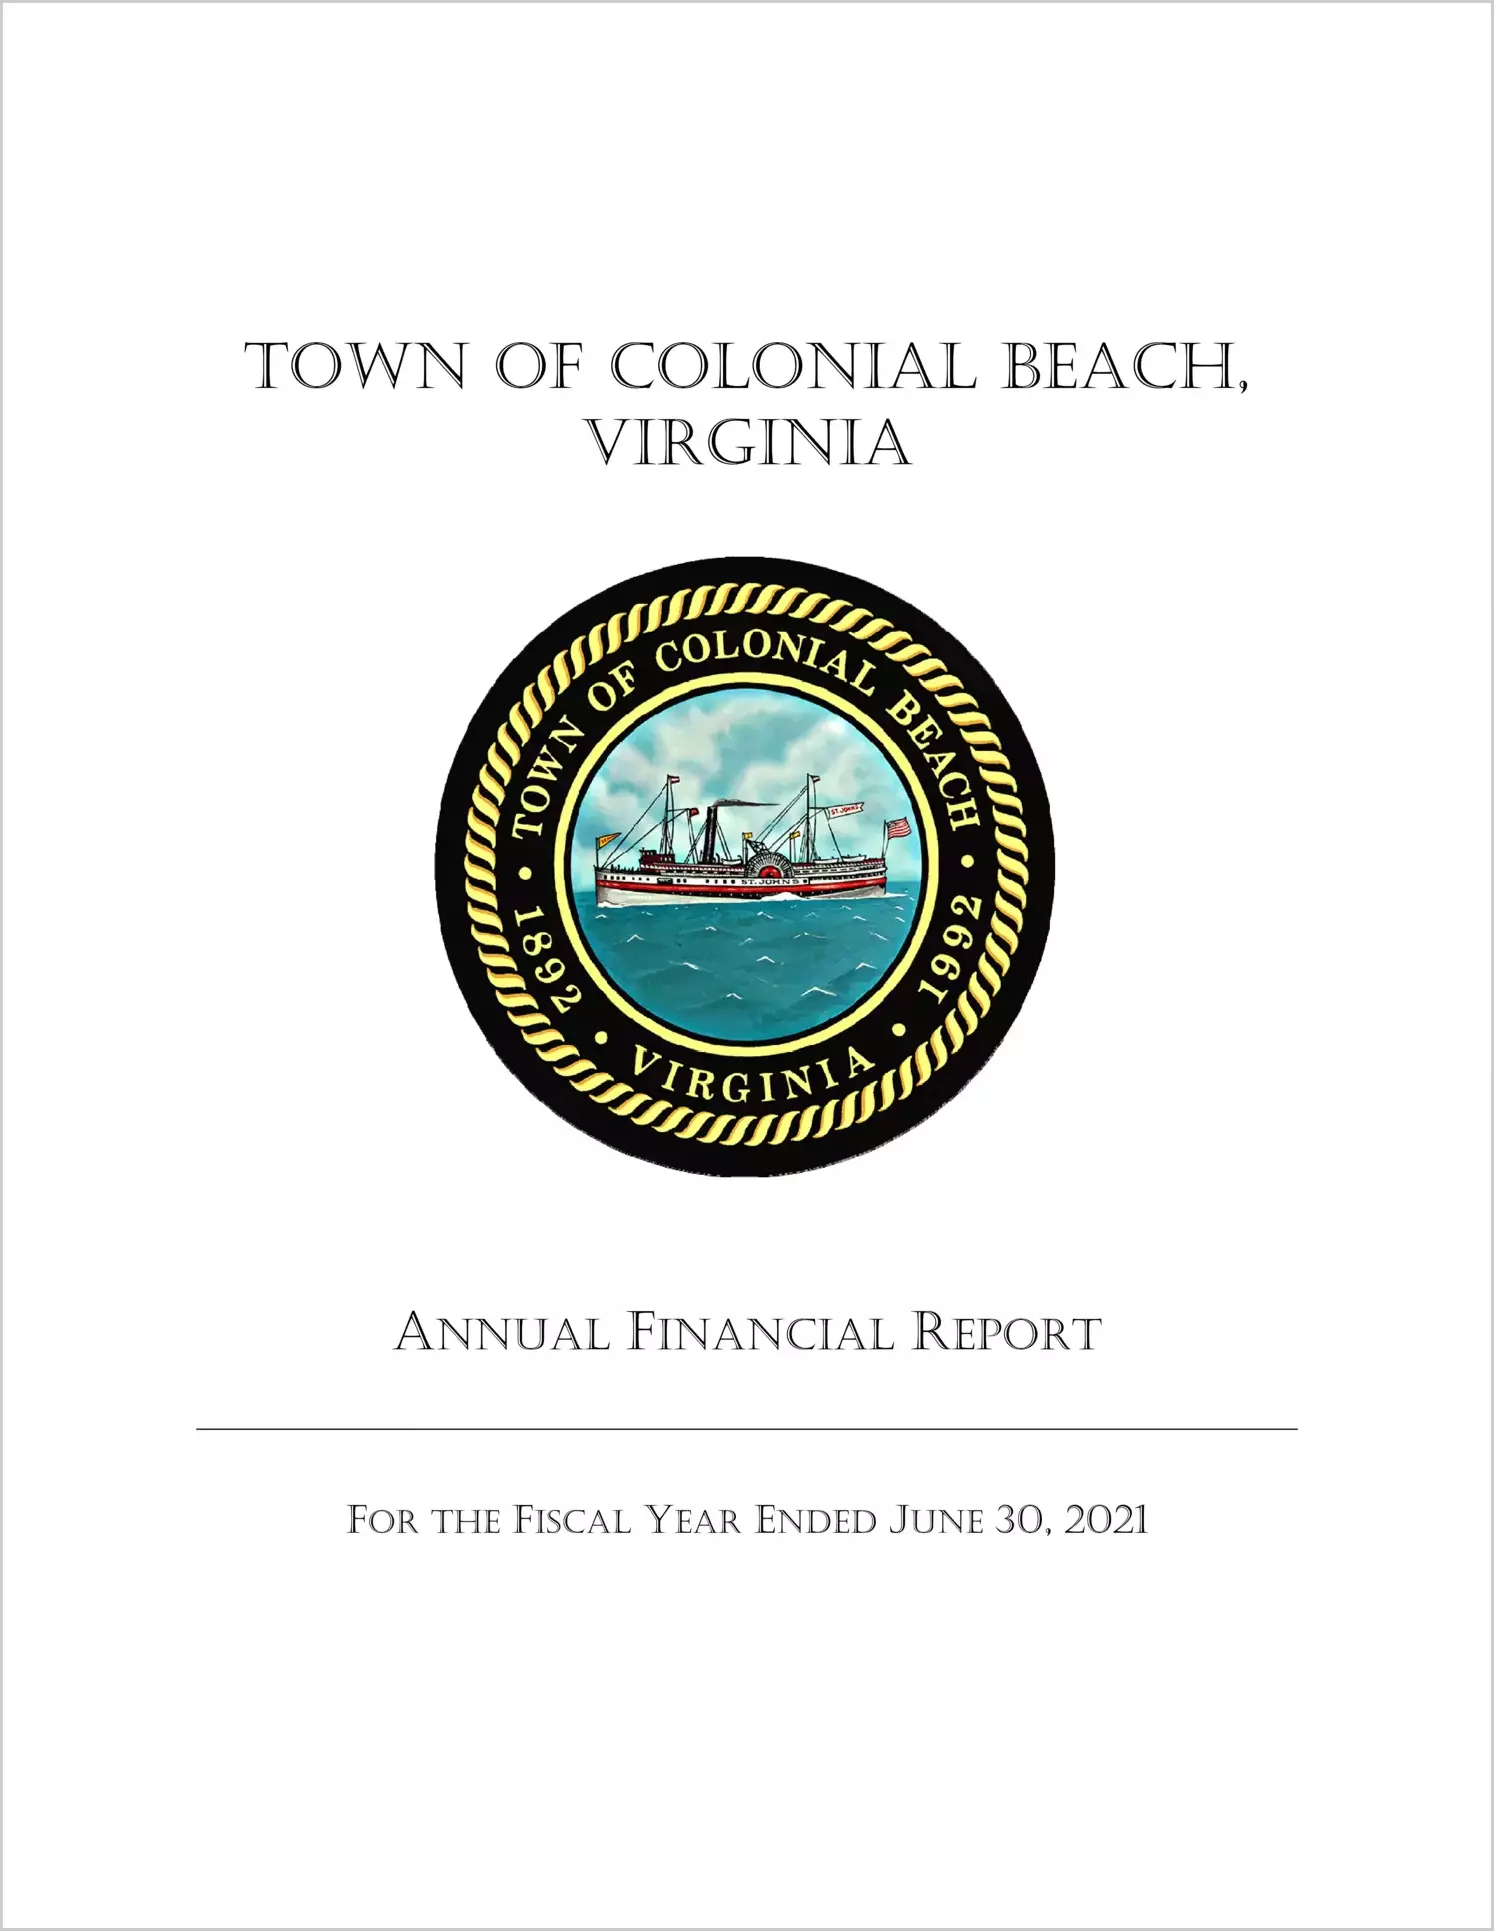 2021 Annual Financial Report for Town of Colonial Beach